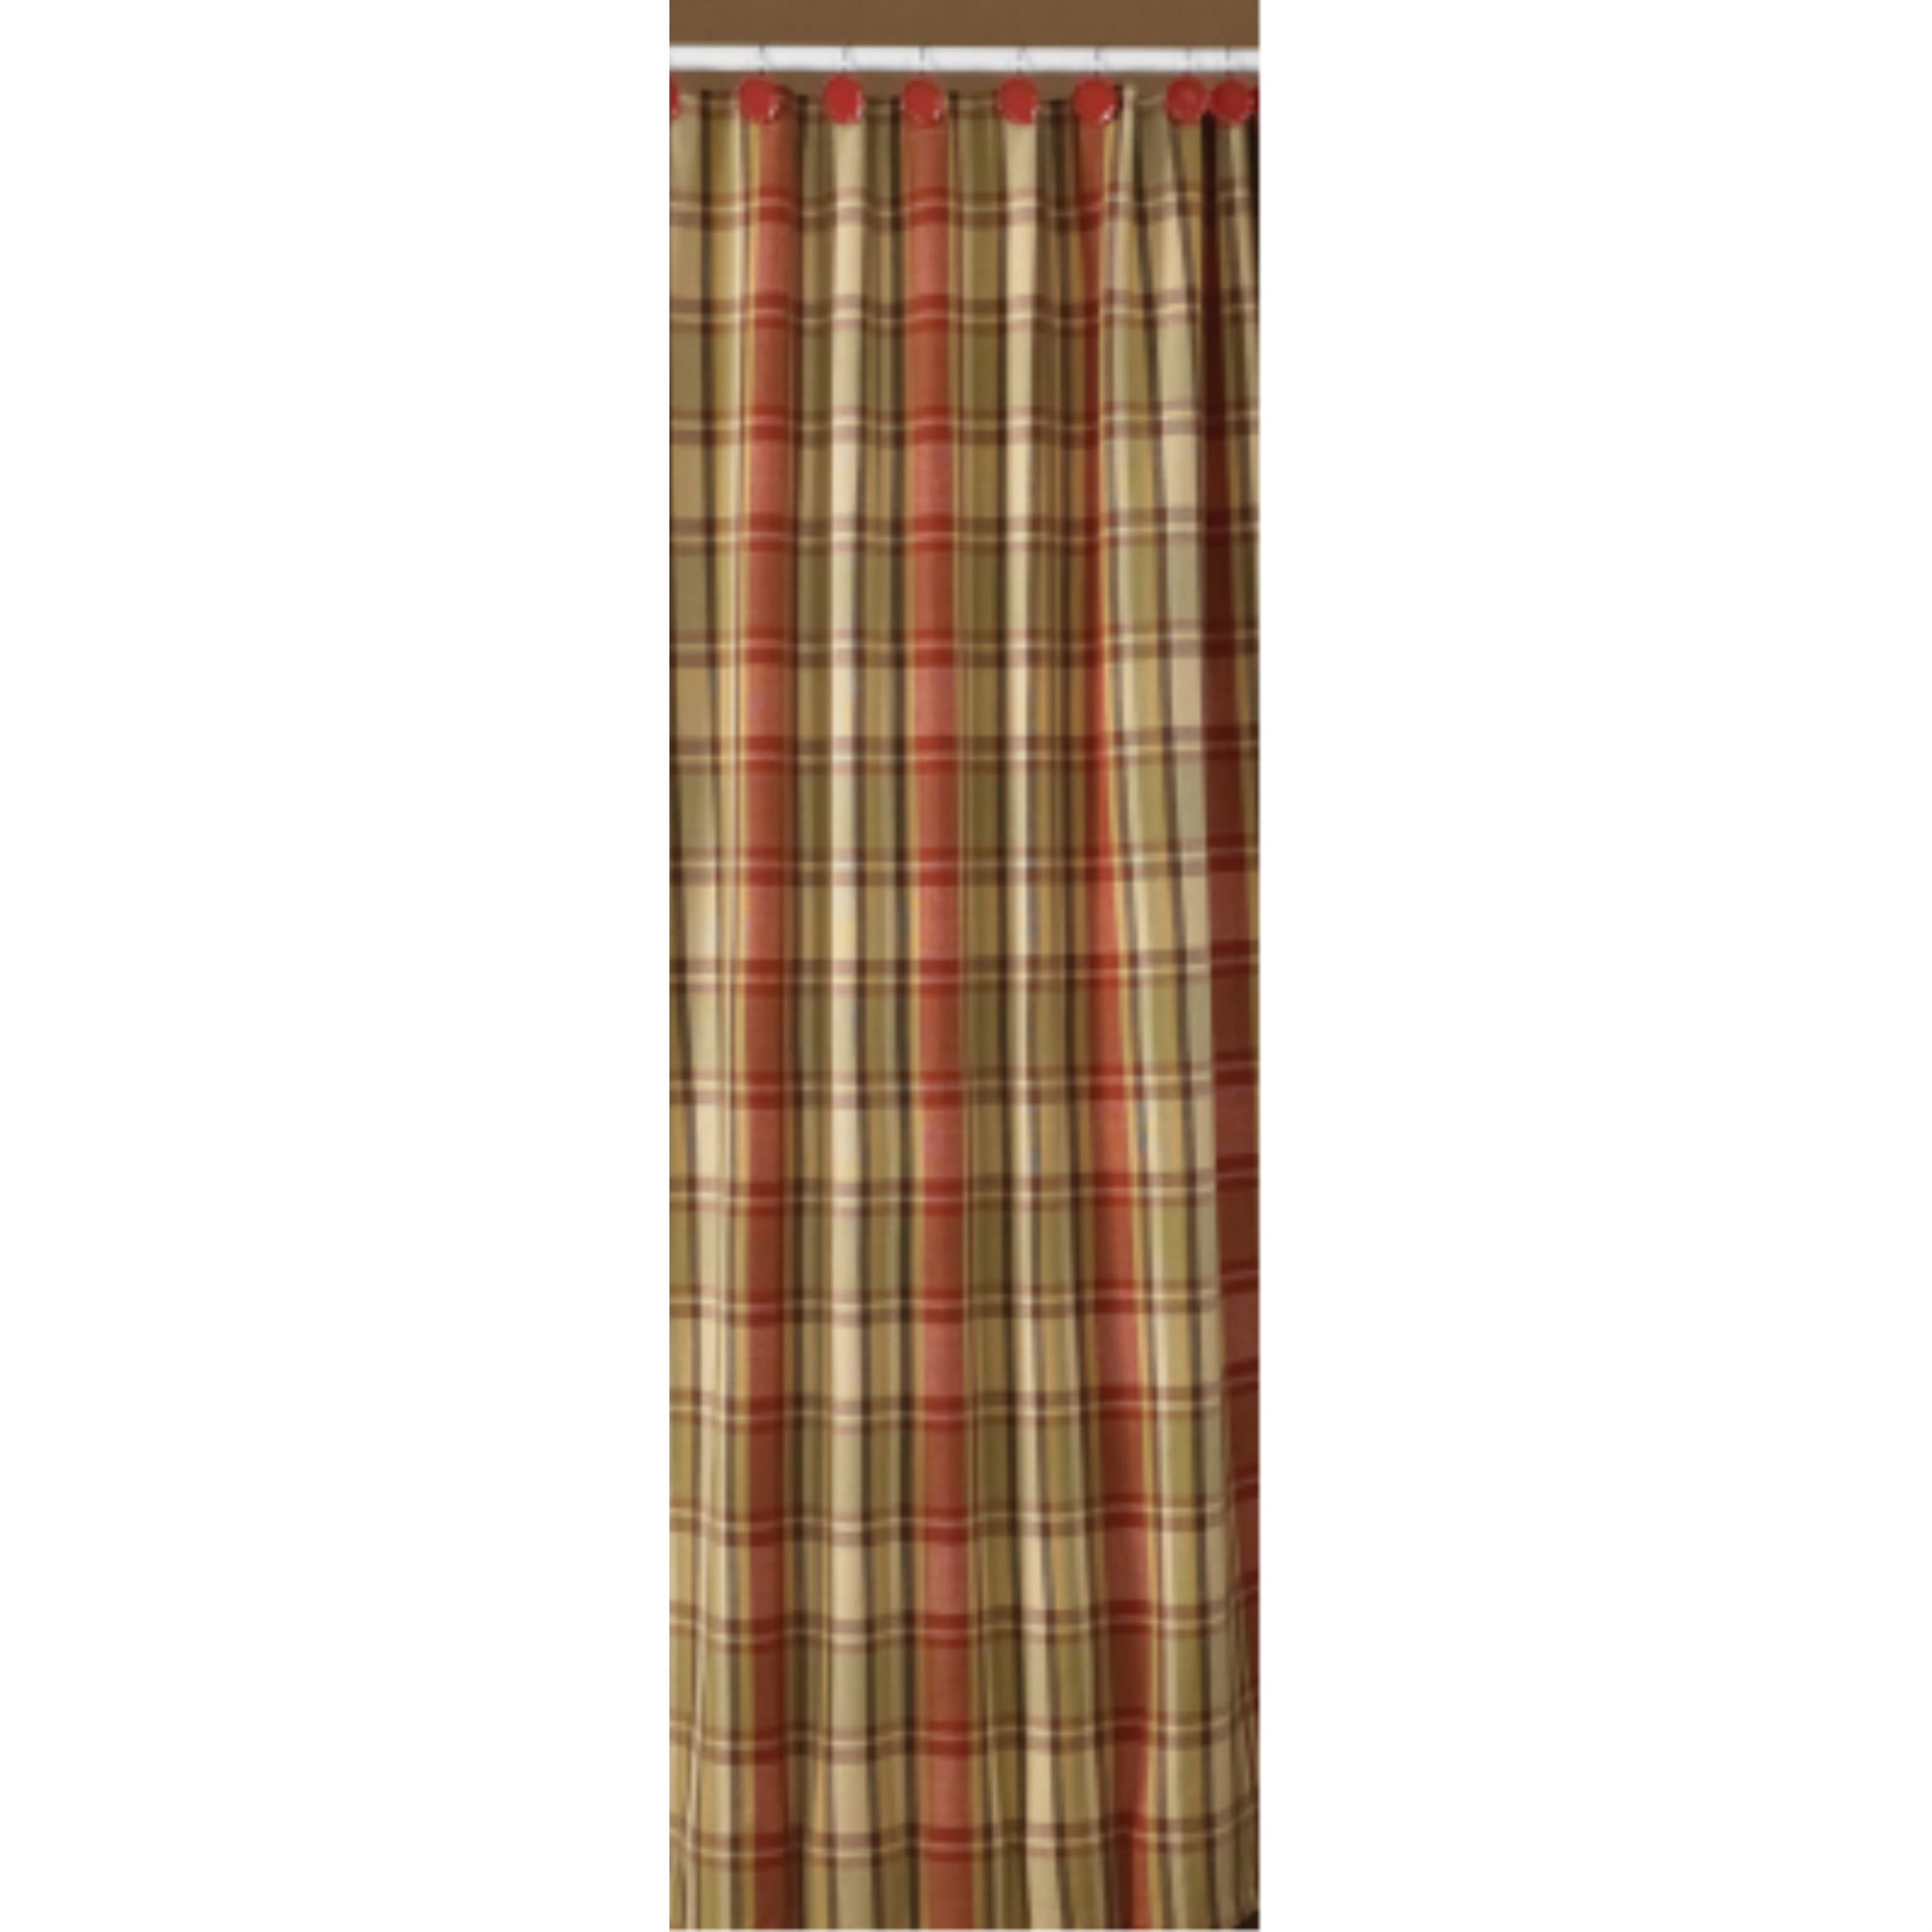 Cambridge Wine Shower Curtain 72x72 Country Plaid 